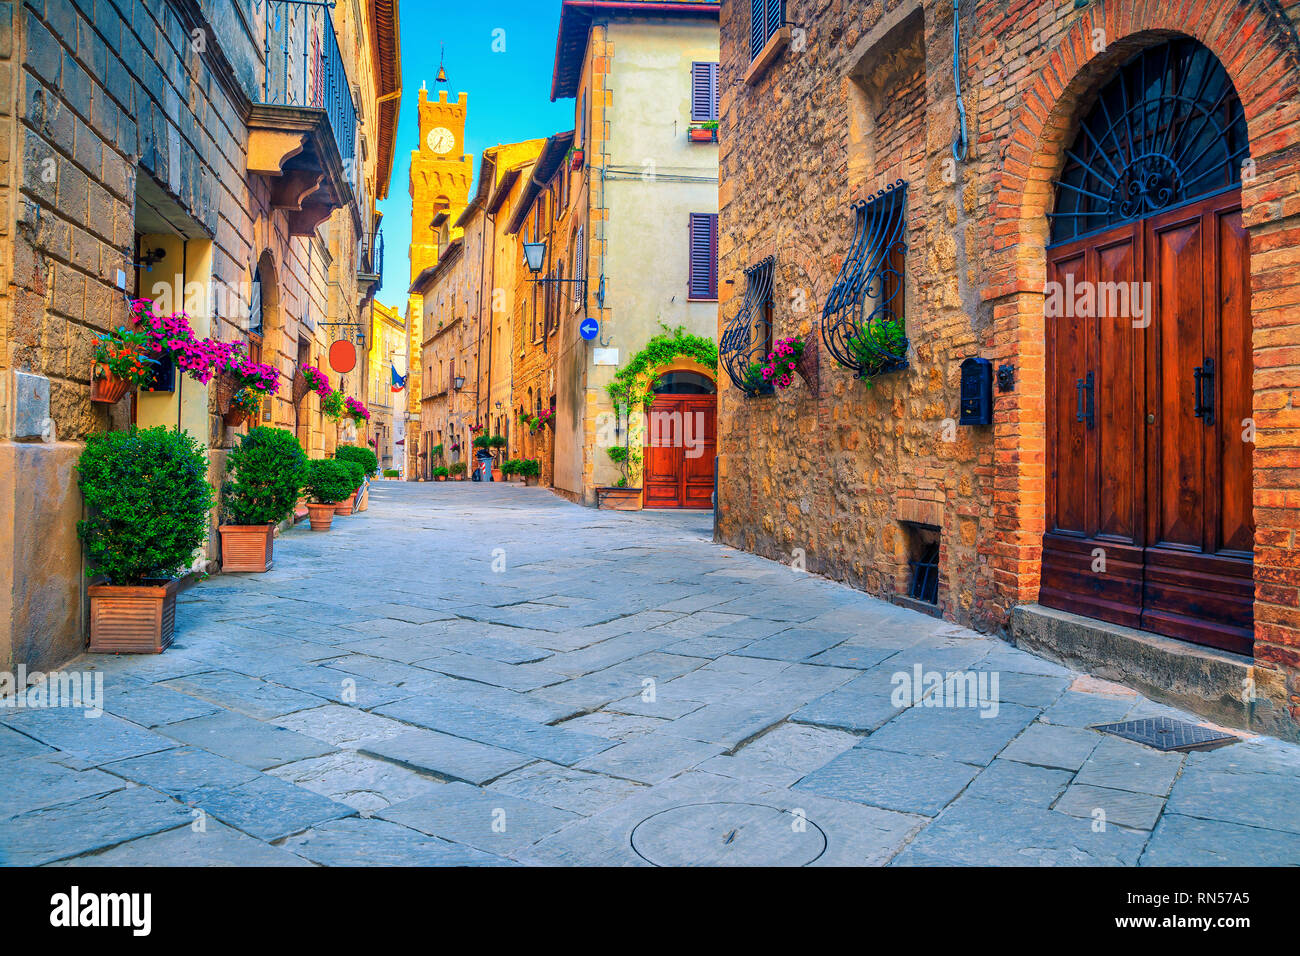 Spectacular traditional Tuscany street view. Admirable medieval stone houses and paved street with flowery entrances, Pienza, Tuscany, Italy, Europe Stock Photo